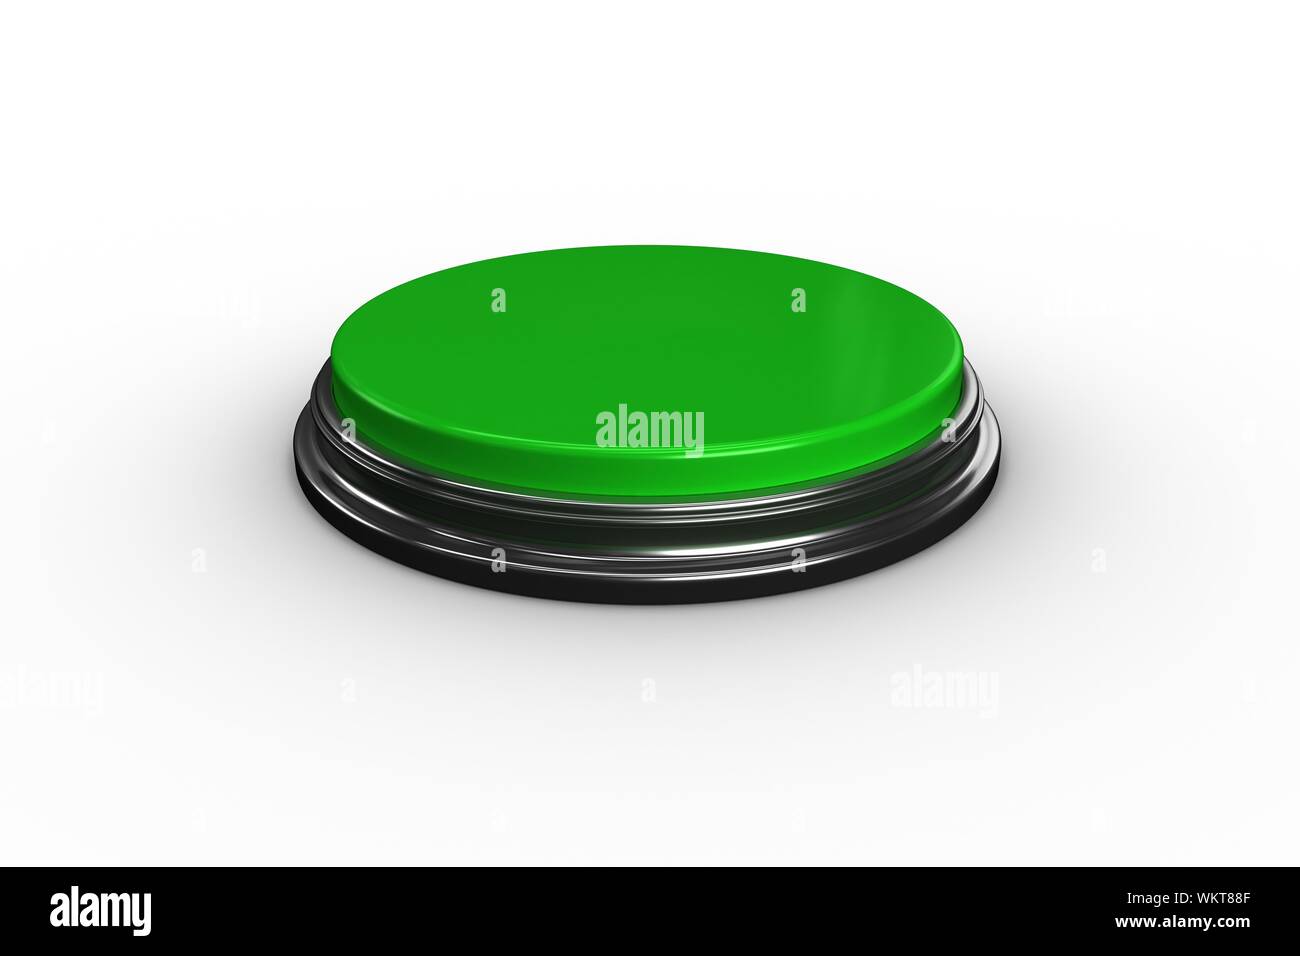 Digitally generated green push button on white background Stock Photo